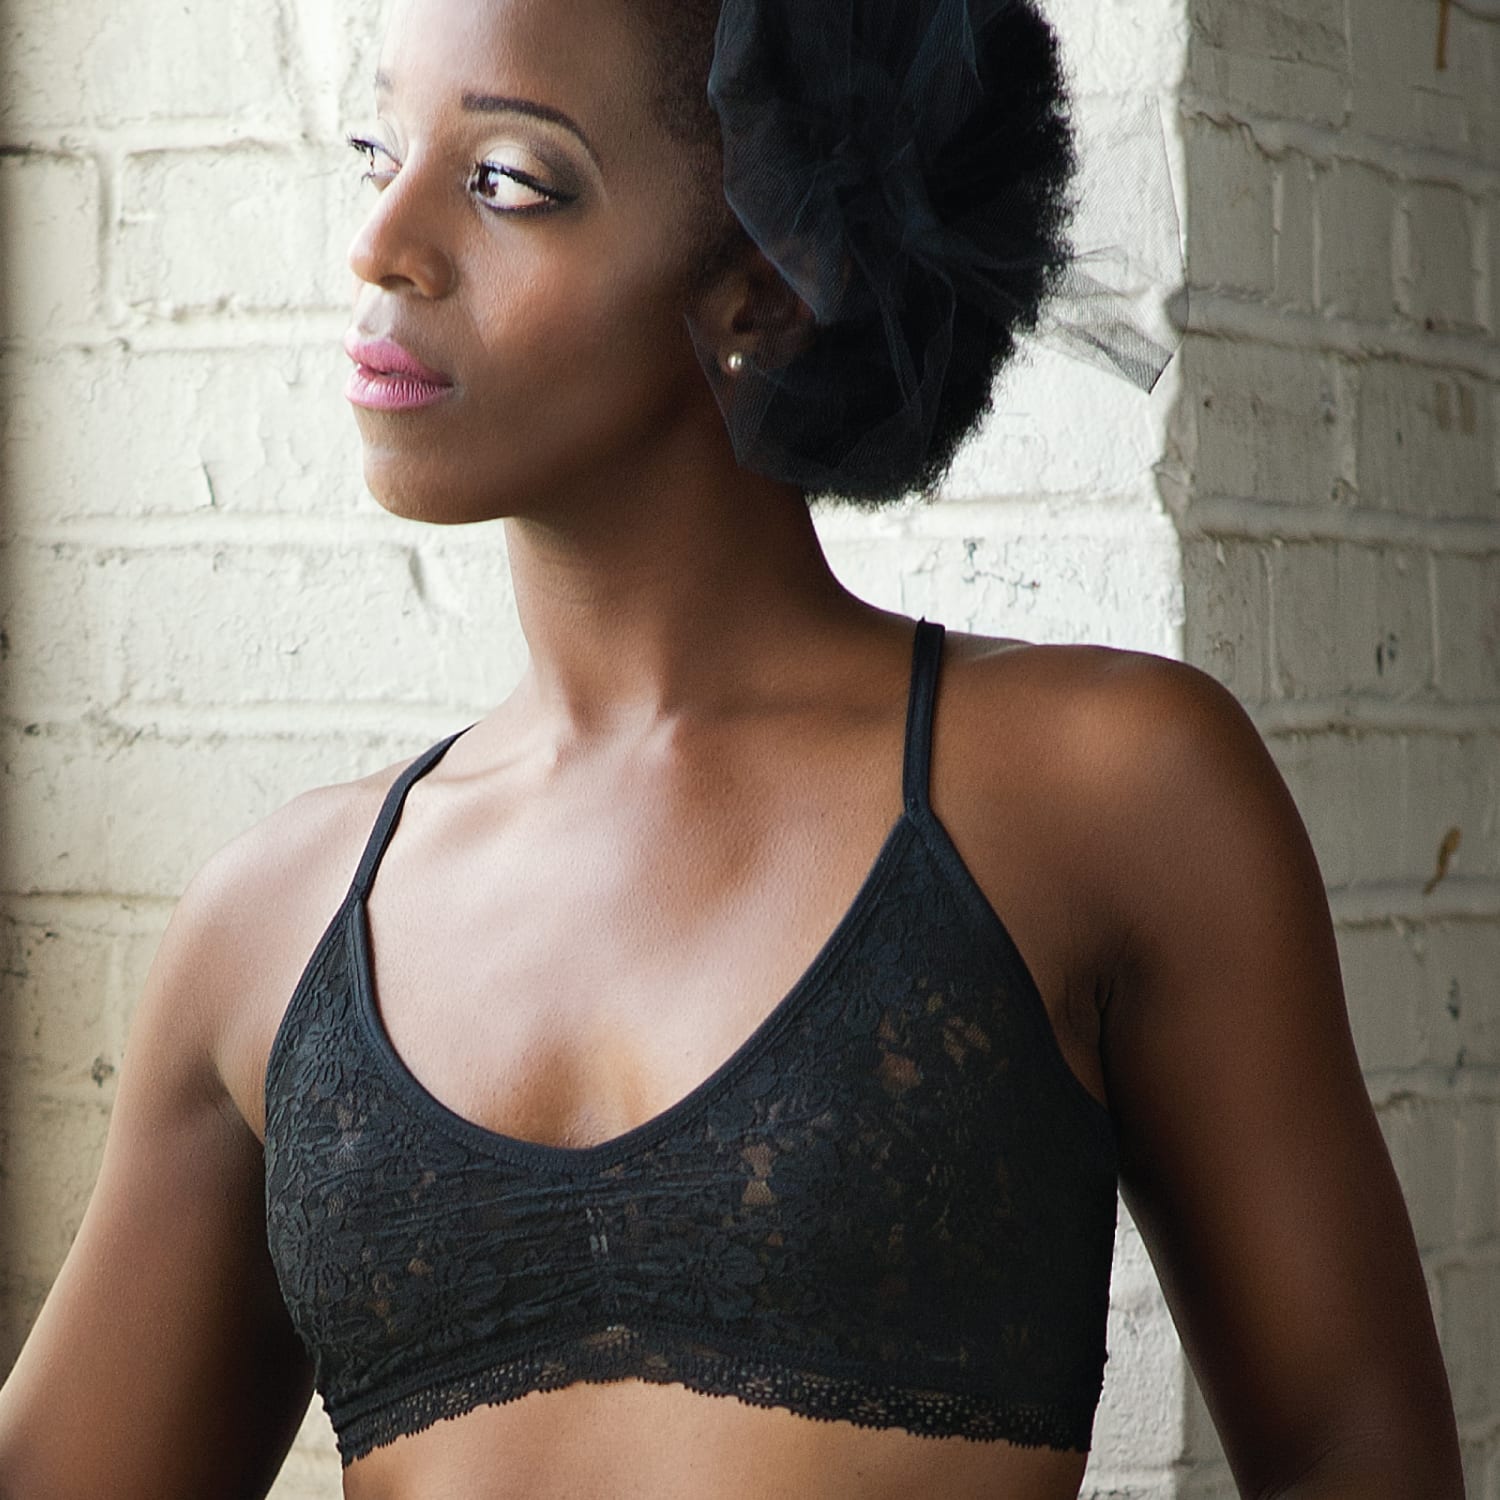 Lingerie line brings sexy back for breast cancer survivors